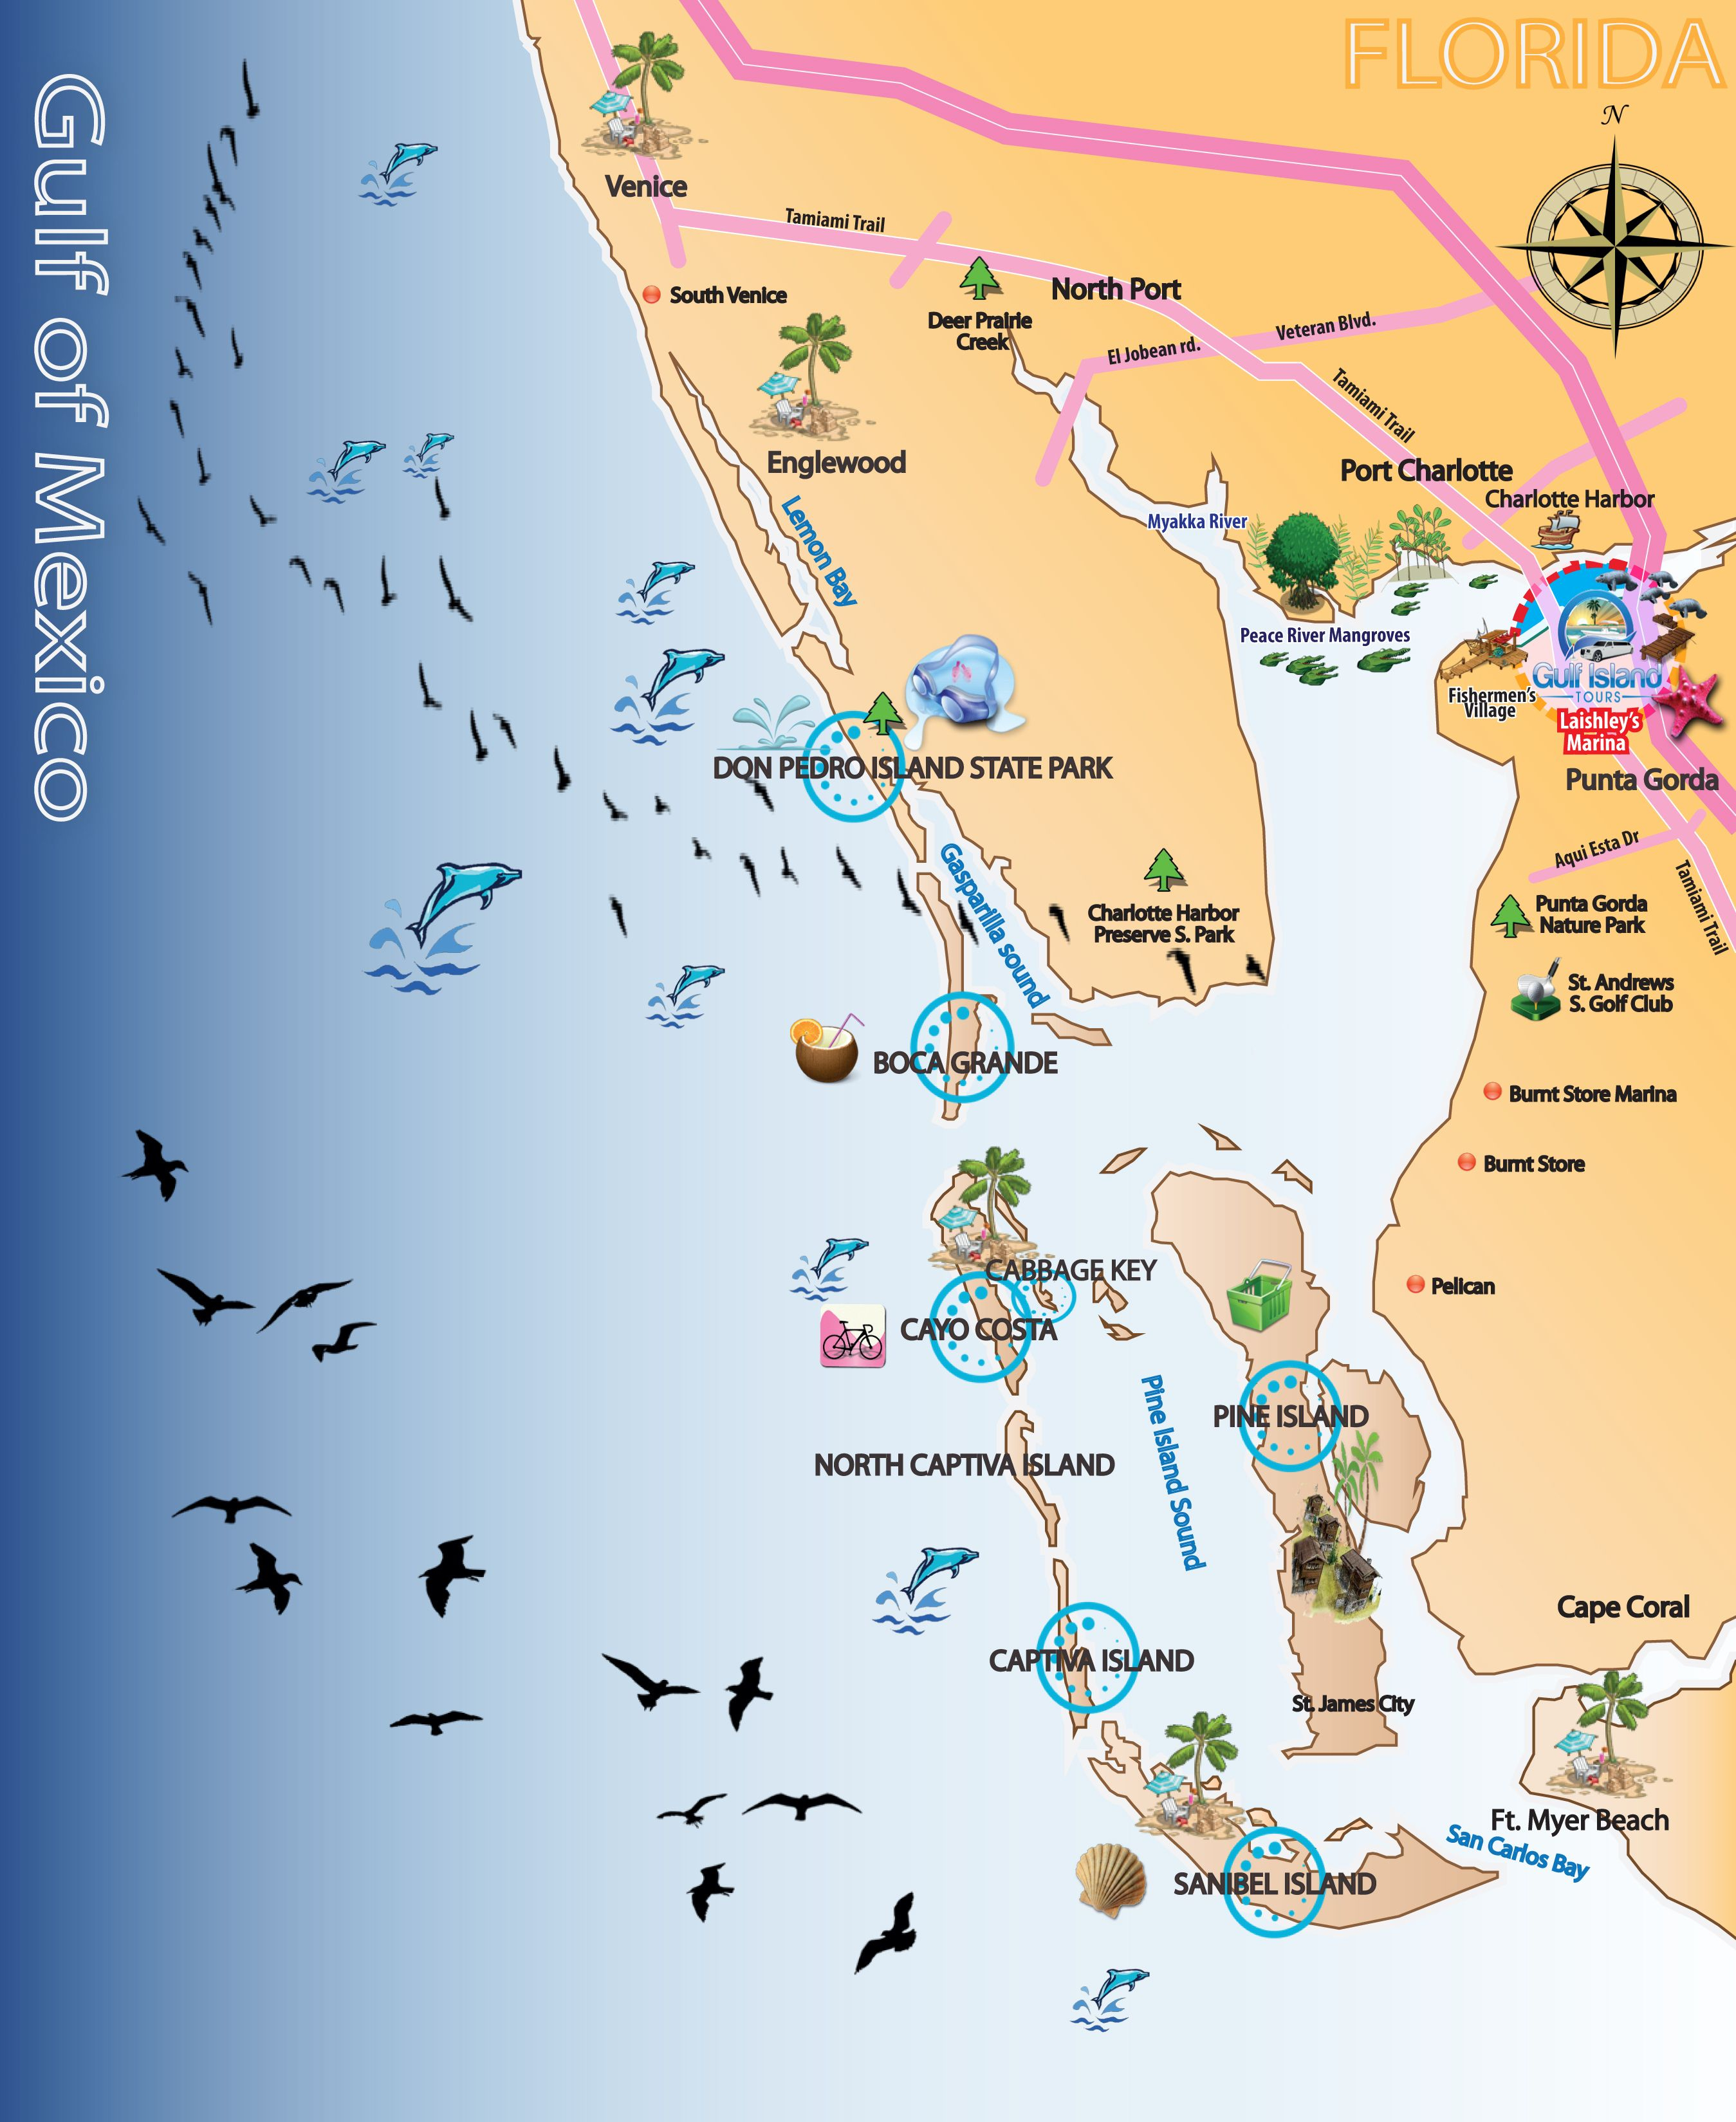 Map Out Your Next Vacation In The Florida Gulf! | Gulf Island Tours - Florida Gulf Map